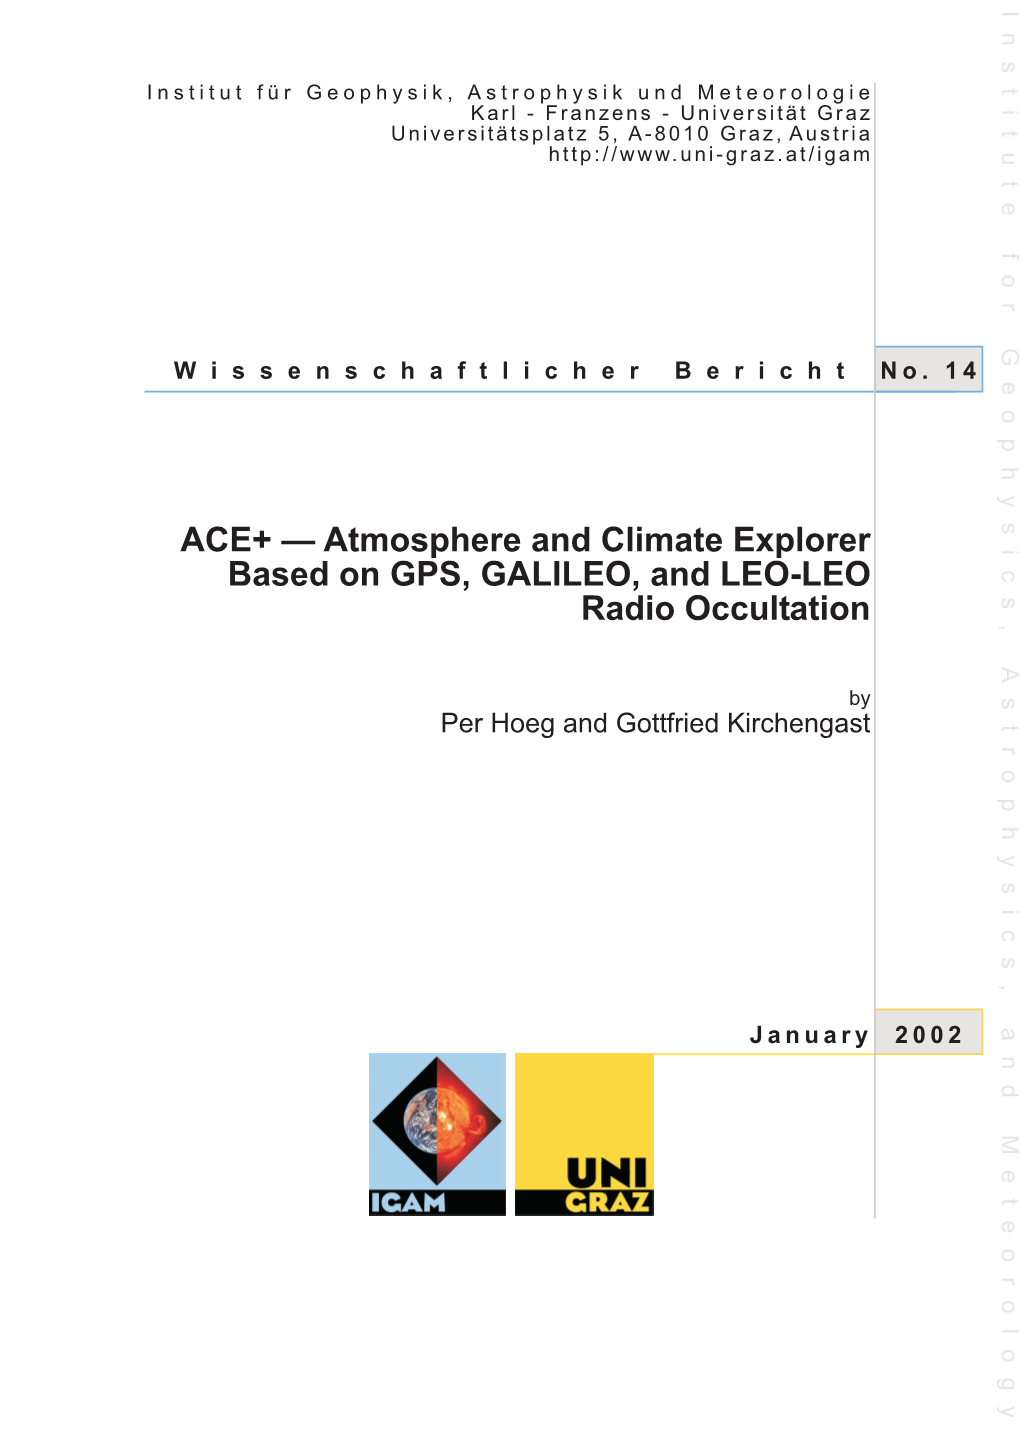 ACE+ — Atmosphere and Climate Explorer Based on GPS, GALILEO